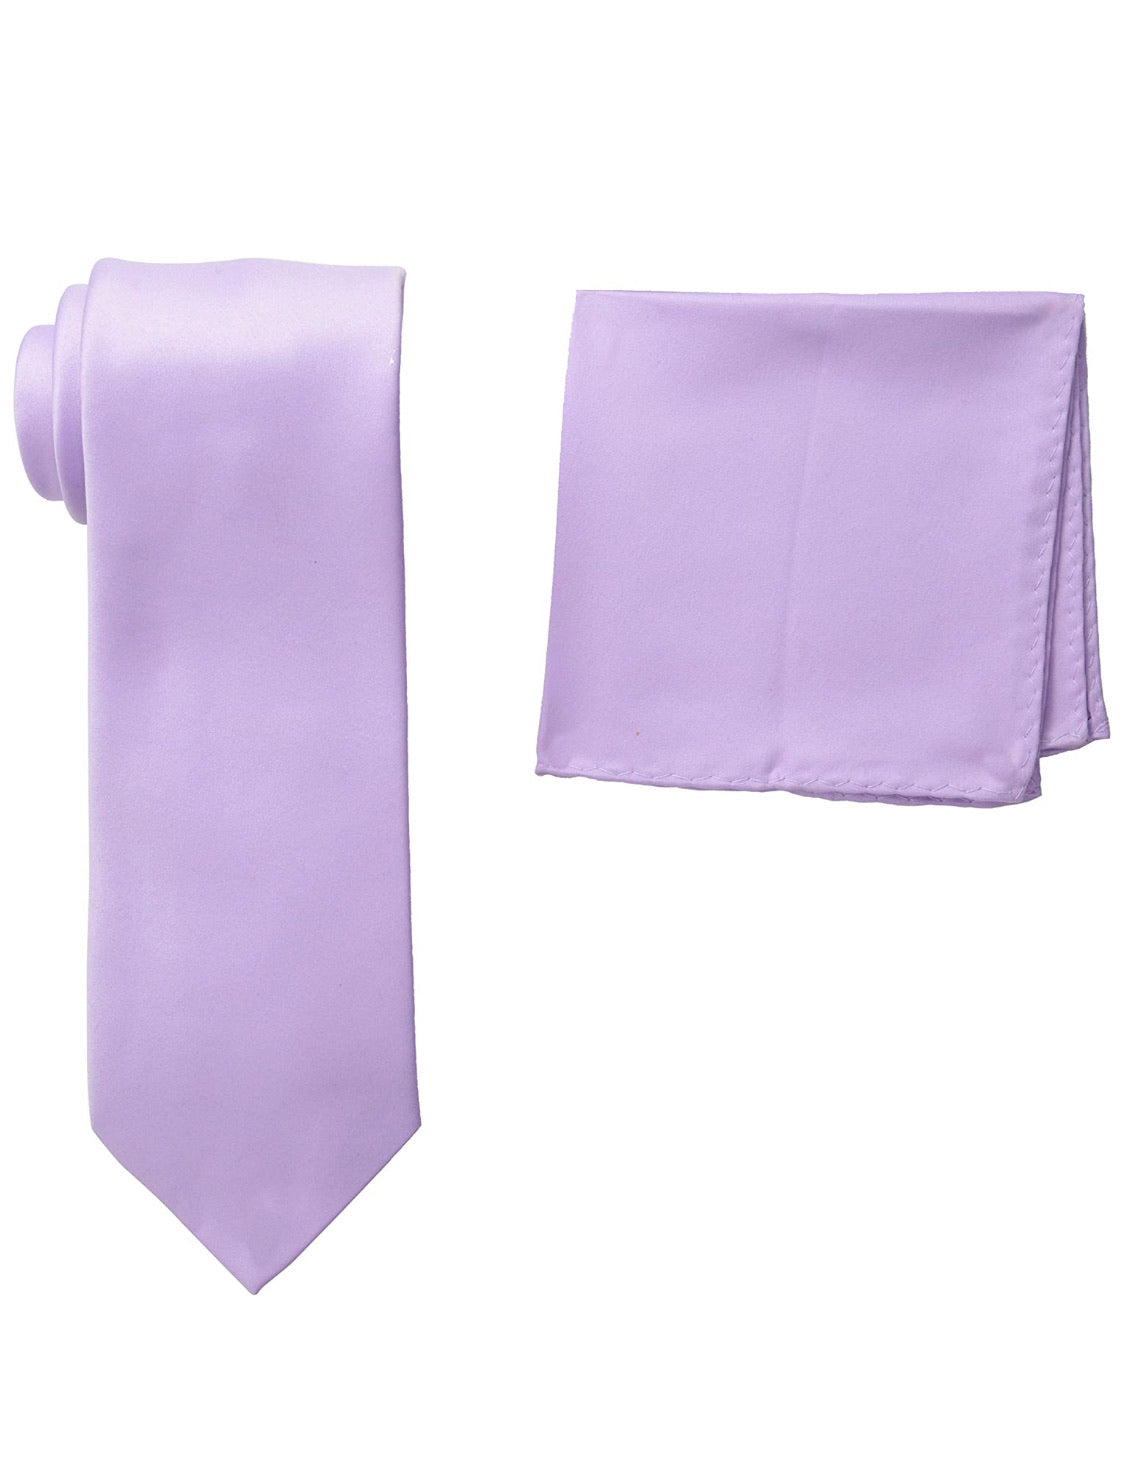 Stacy Adams Solid Lavender Tie and Hanky - On Time Fashions Tuscaloosa